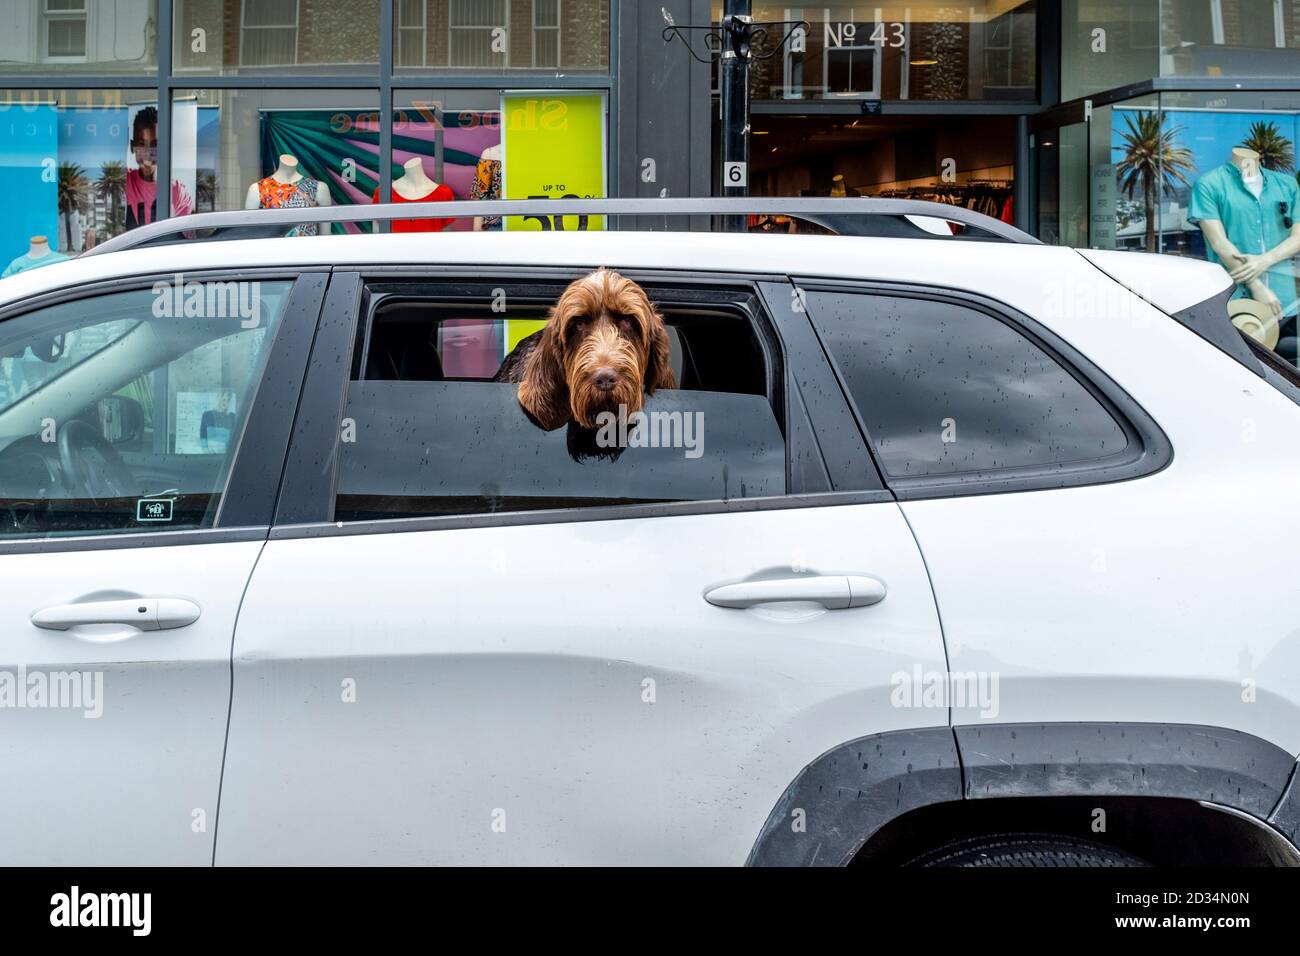 A Dog Looking Out Of A Partially Opened Car Window, Seaford, Sussex, UK. Stock Photo